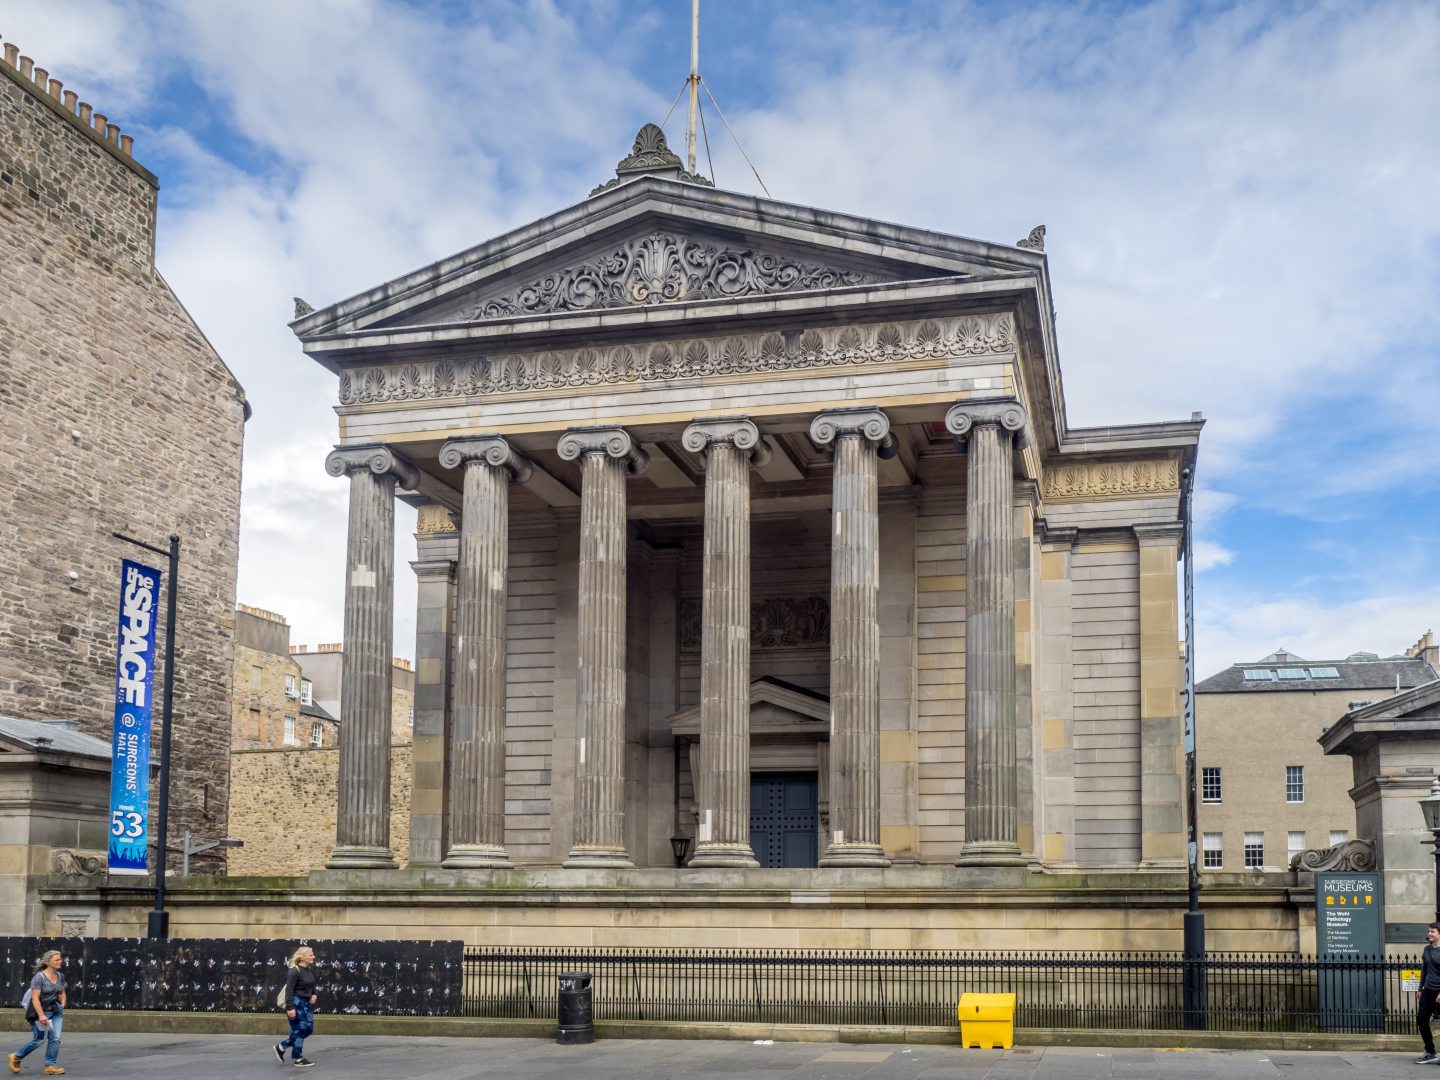 The Royal College's base in Edinburgh, Surgeon's Hall. Image: Shutterstock